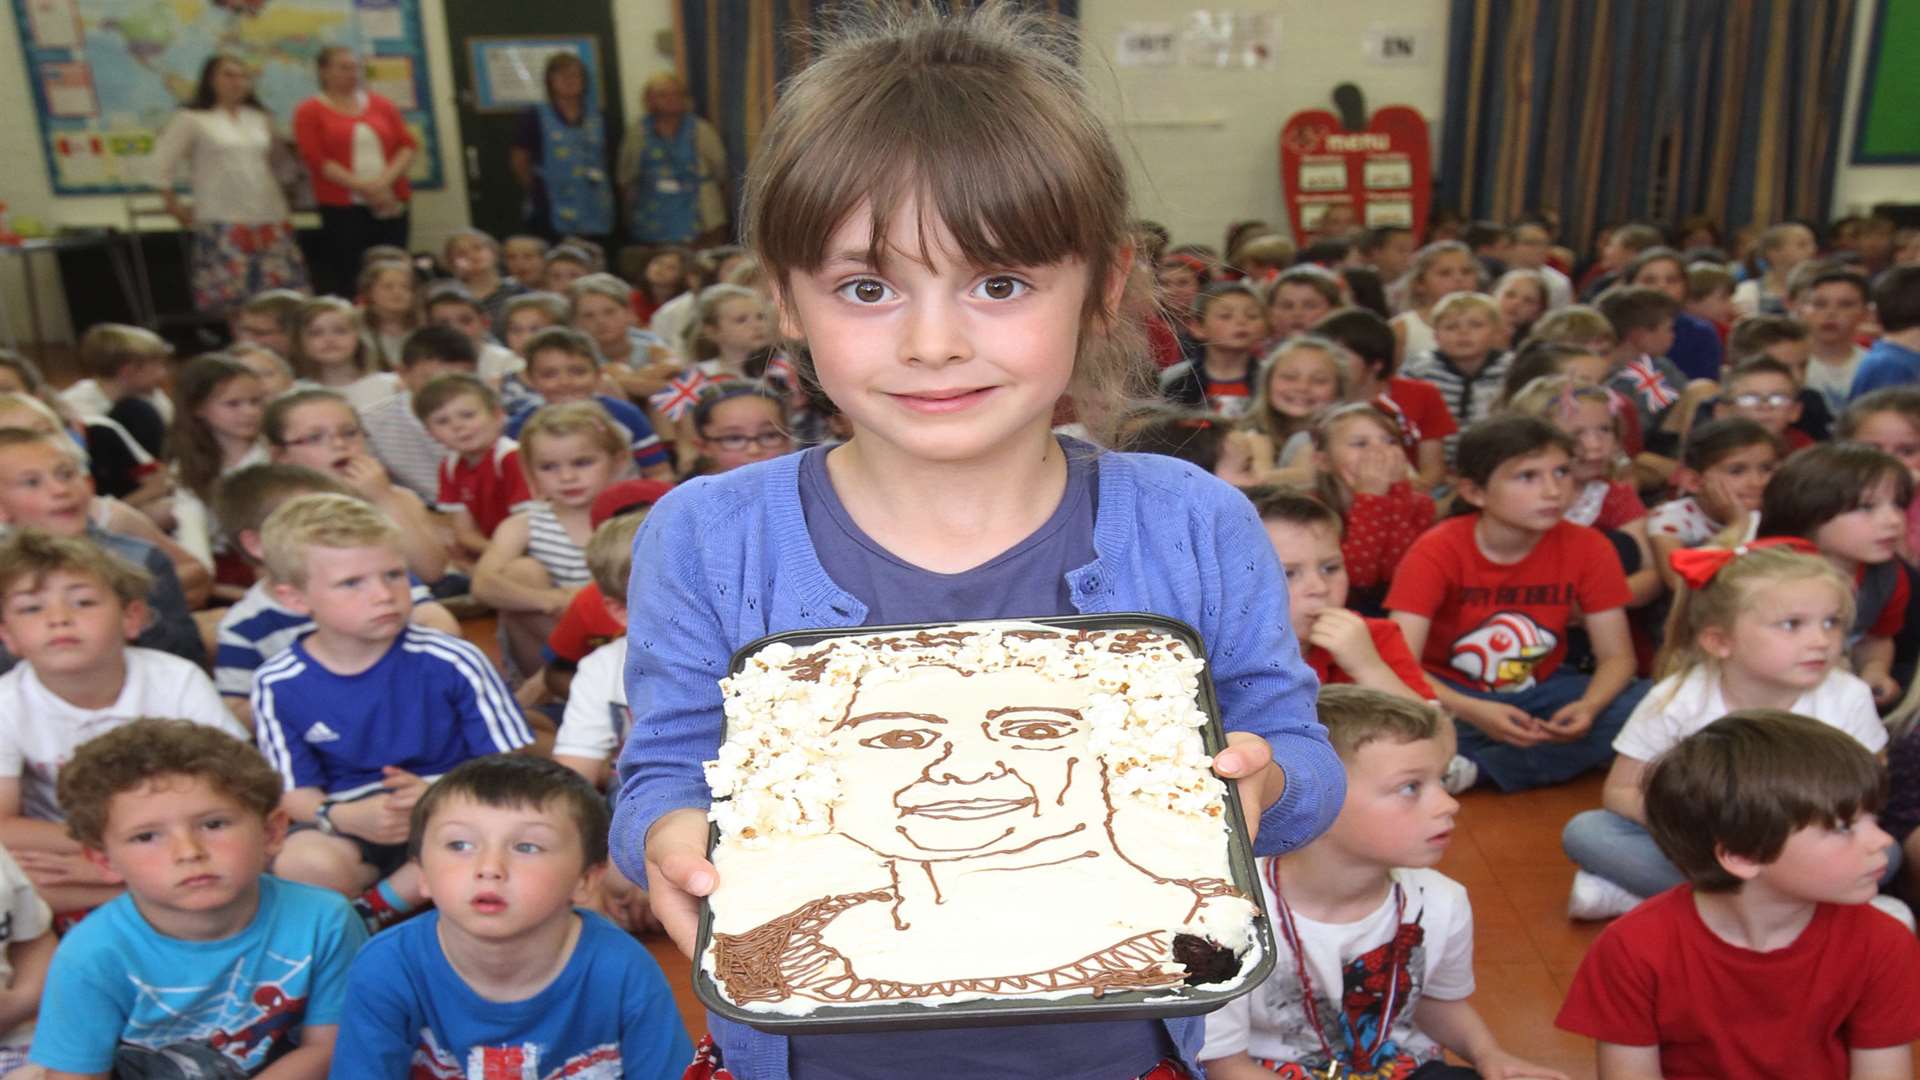 Wateringbury Primary School pupil Sophie decorated a cake to mark the occasion. Picture: John Westhrop